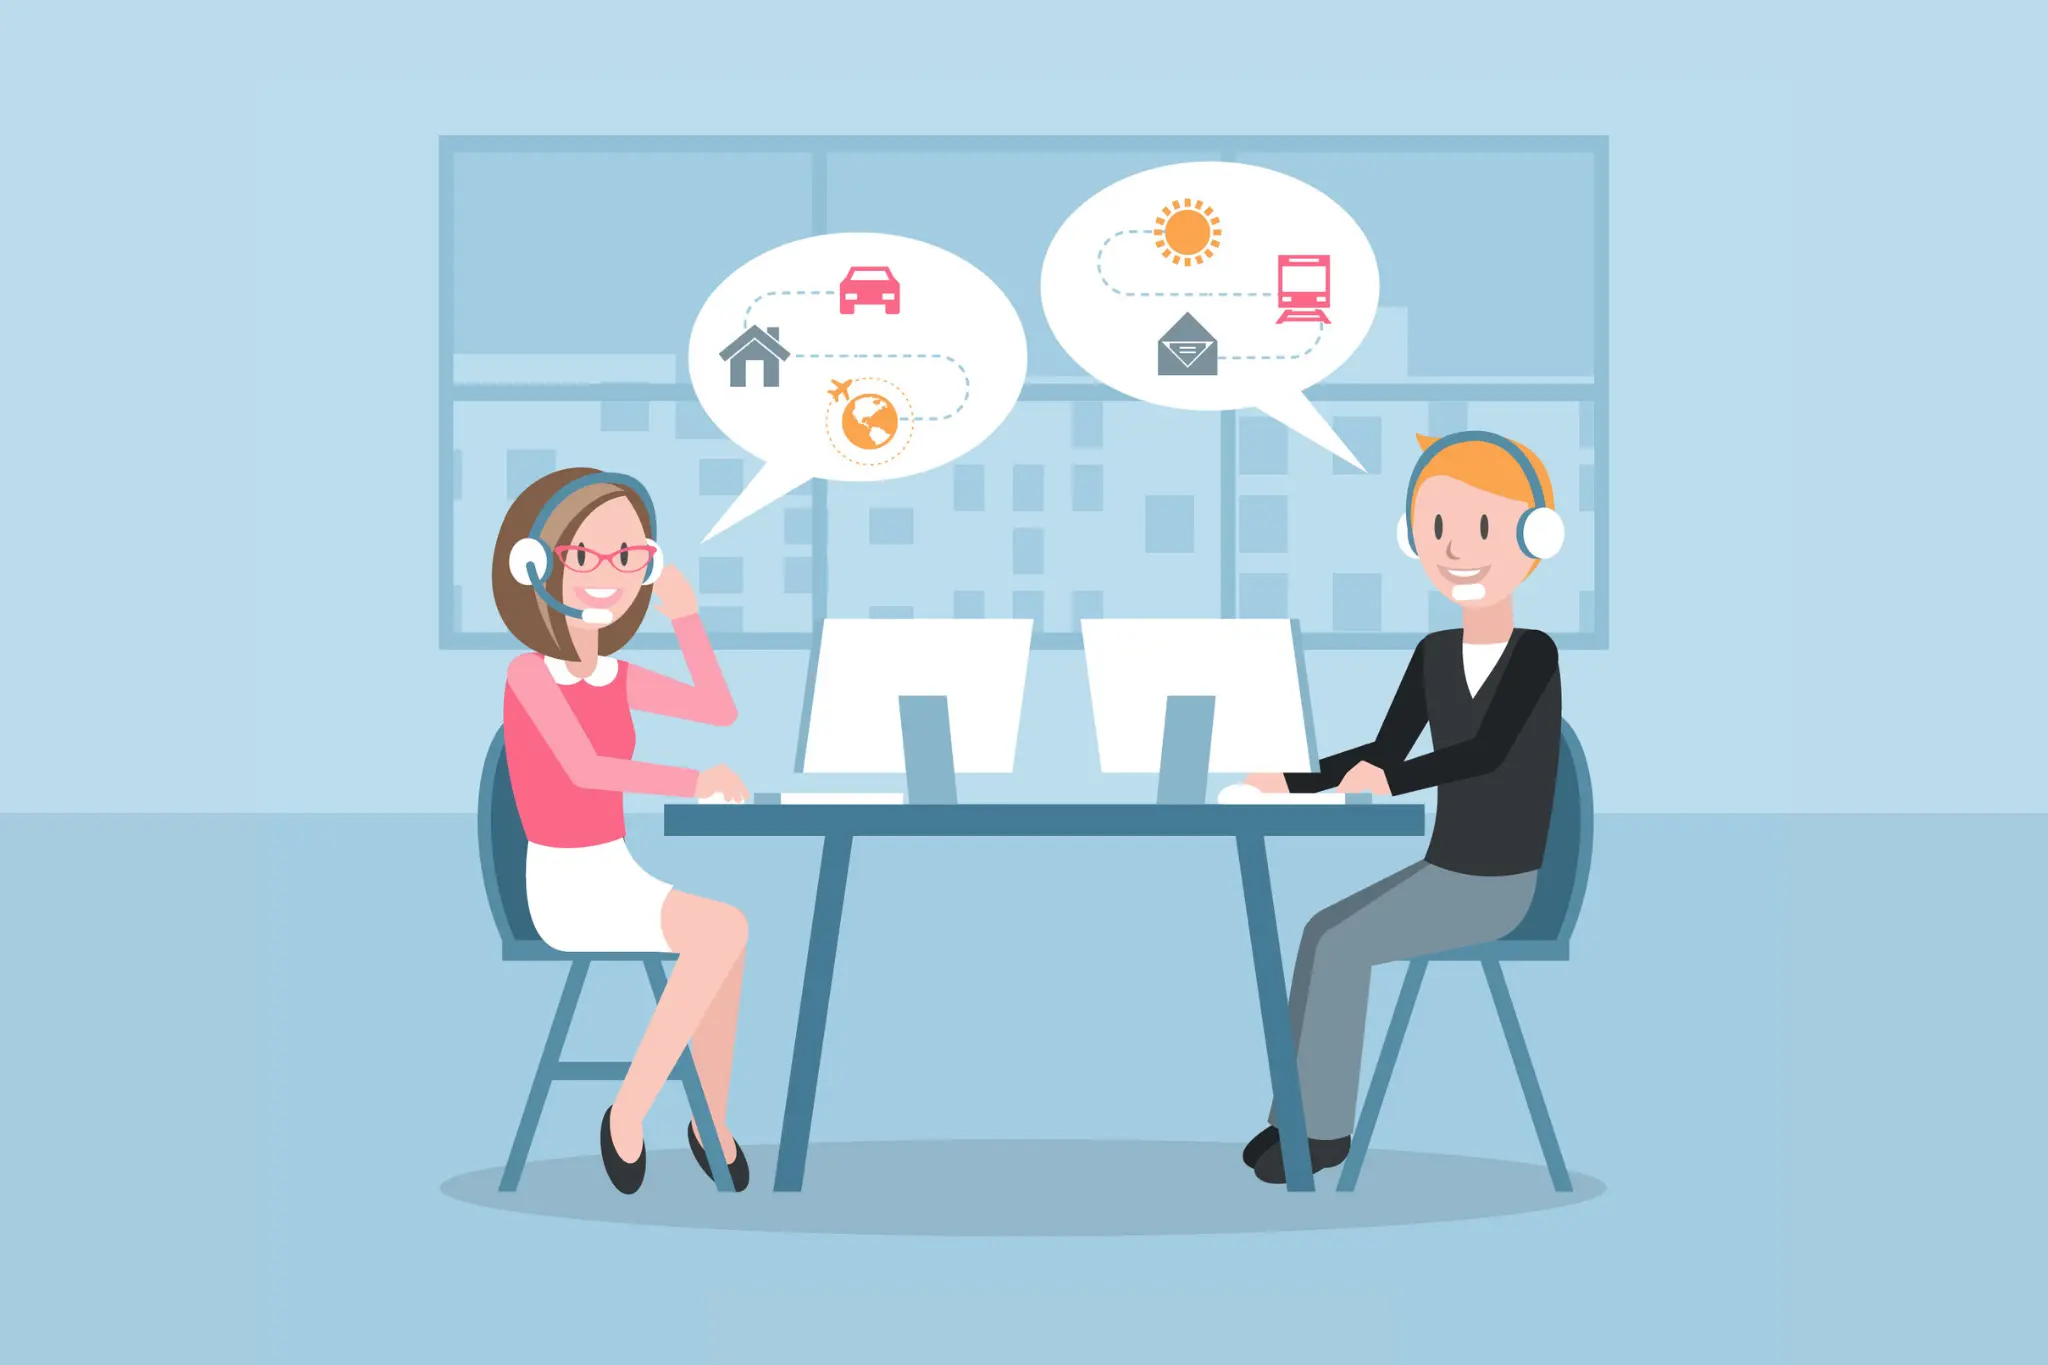 Two call center agents sit on the table wearing headphones, and a thought bubble displays above their heads. The thought bubble shows vectors of home, car, sun, train, and earth.